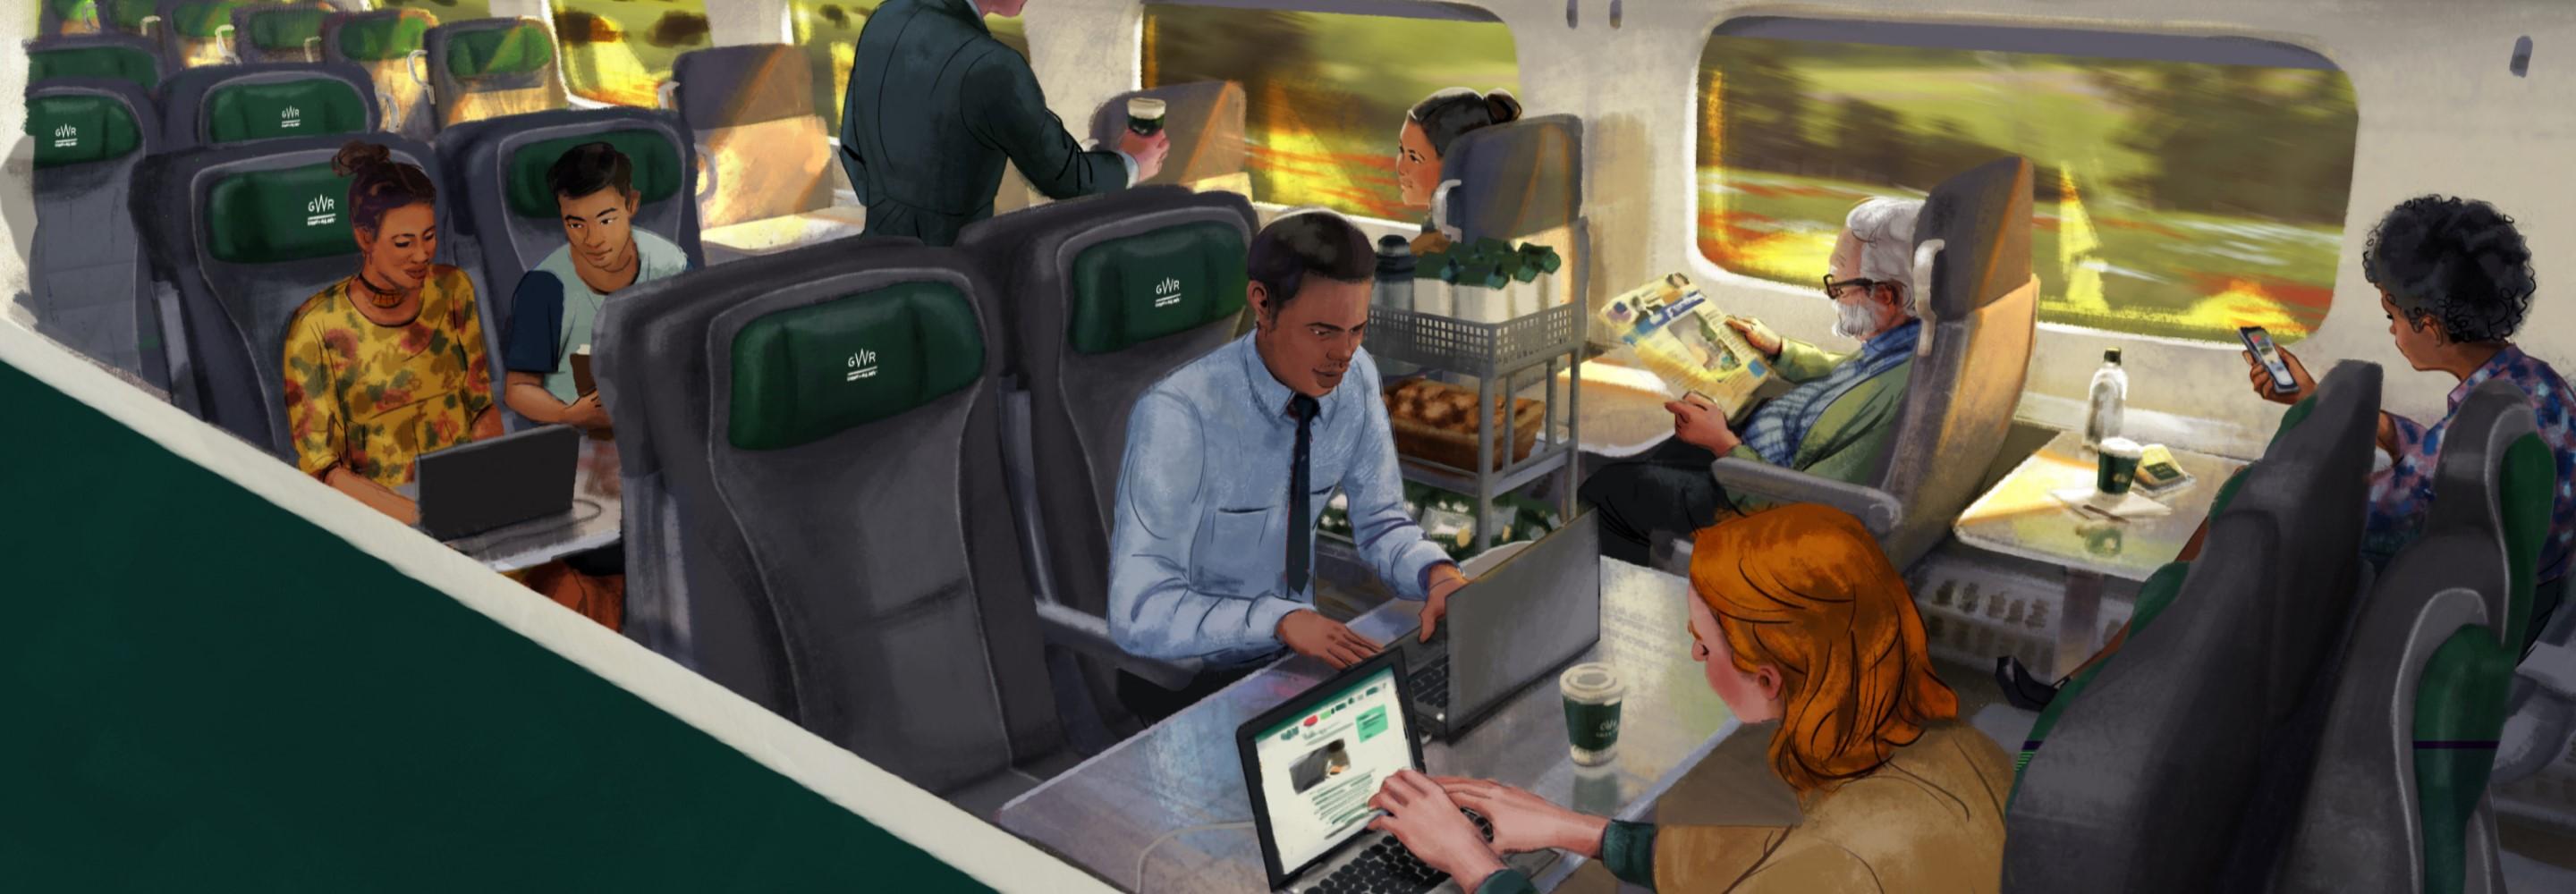 Illustration of First Class on a GWR train, with people working on laptops, enjoying the complimentary refreshments, and relaxing on their journey.